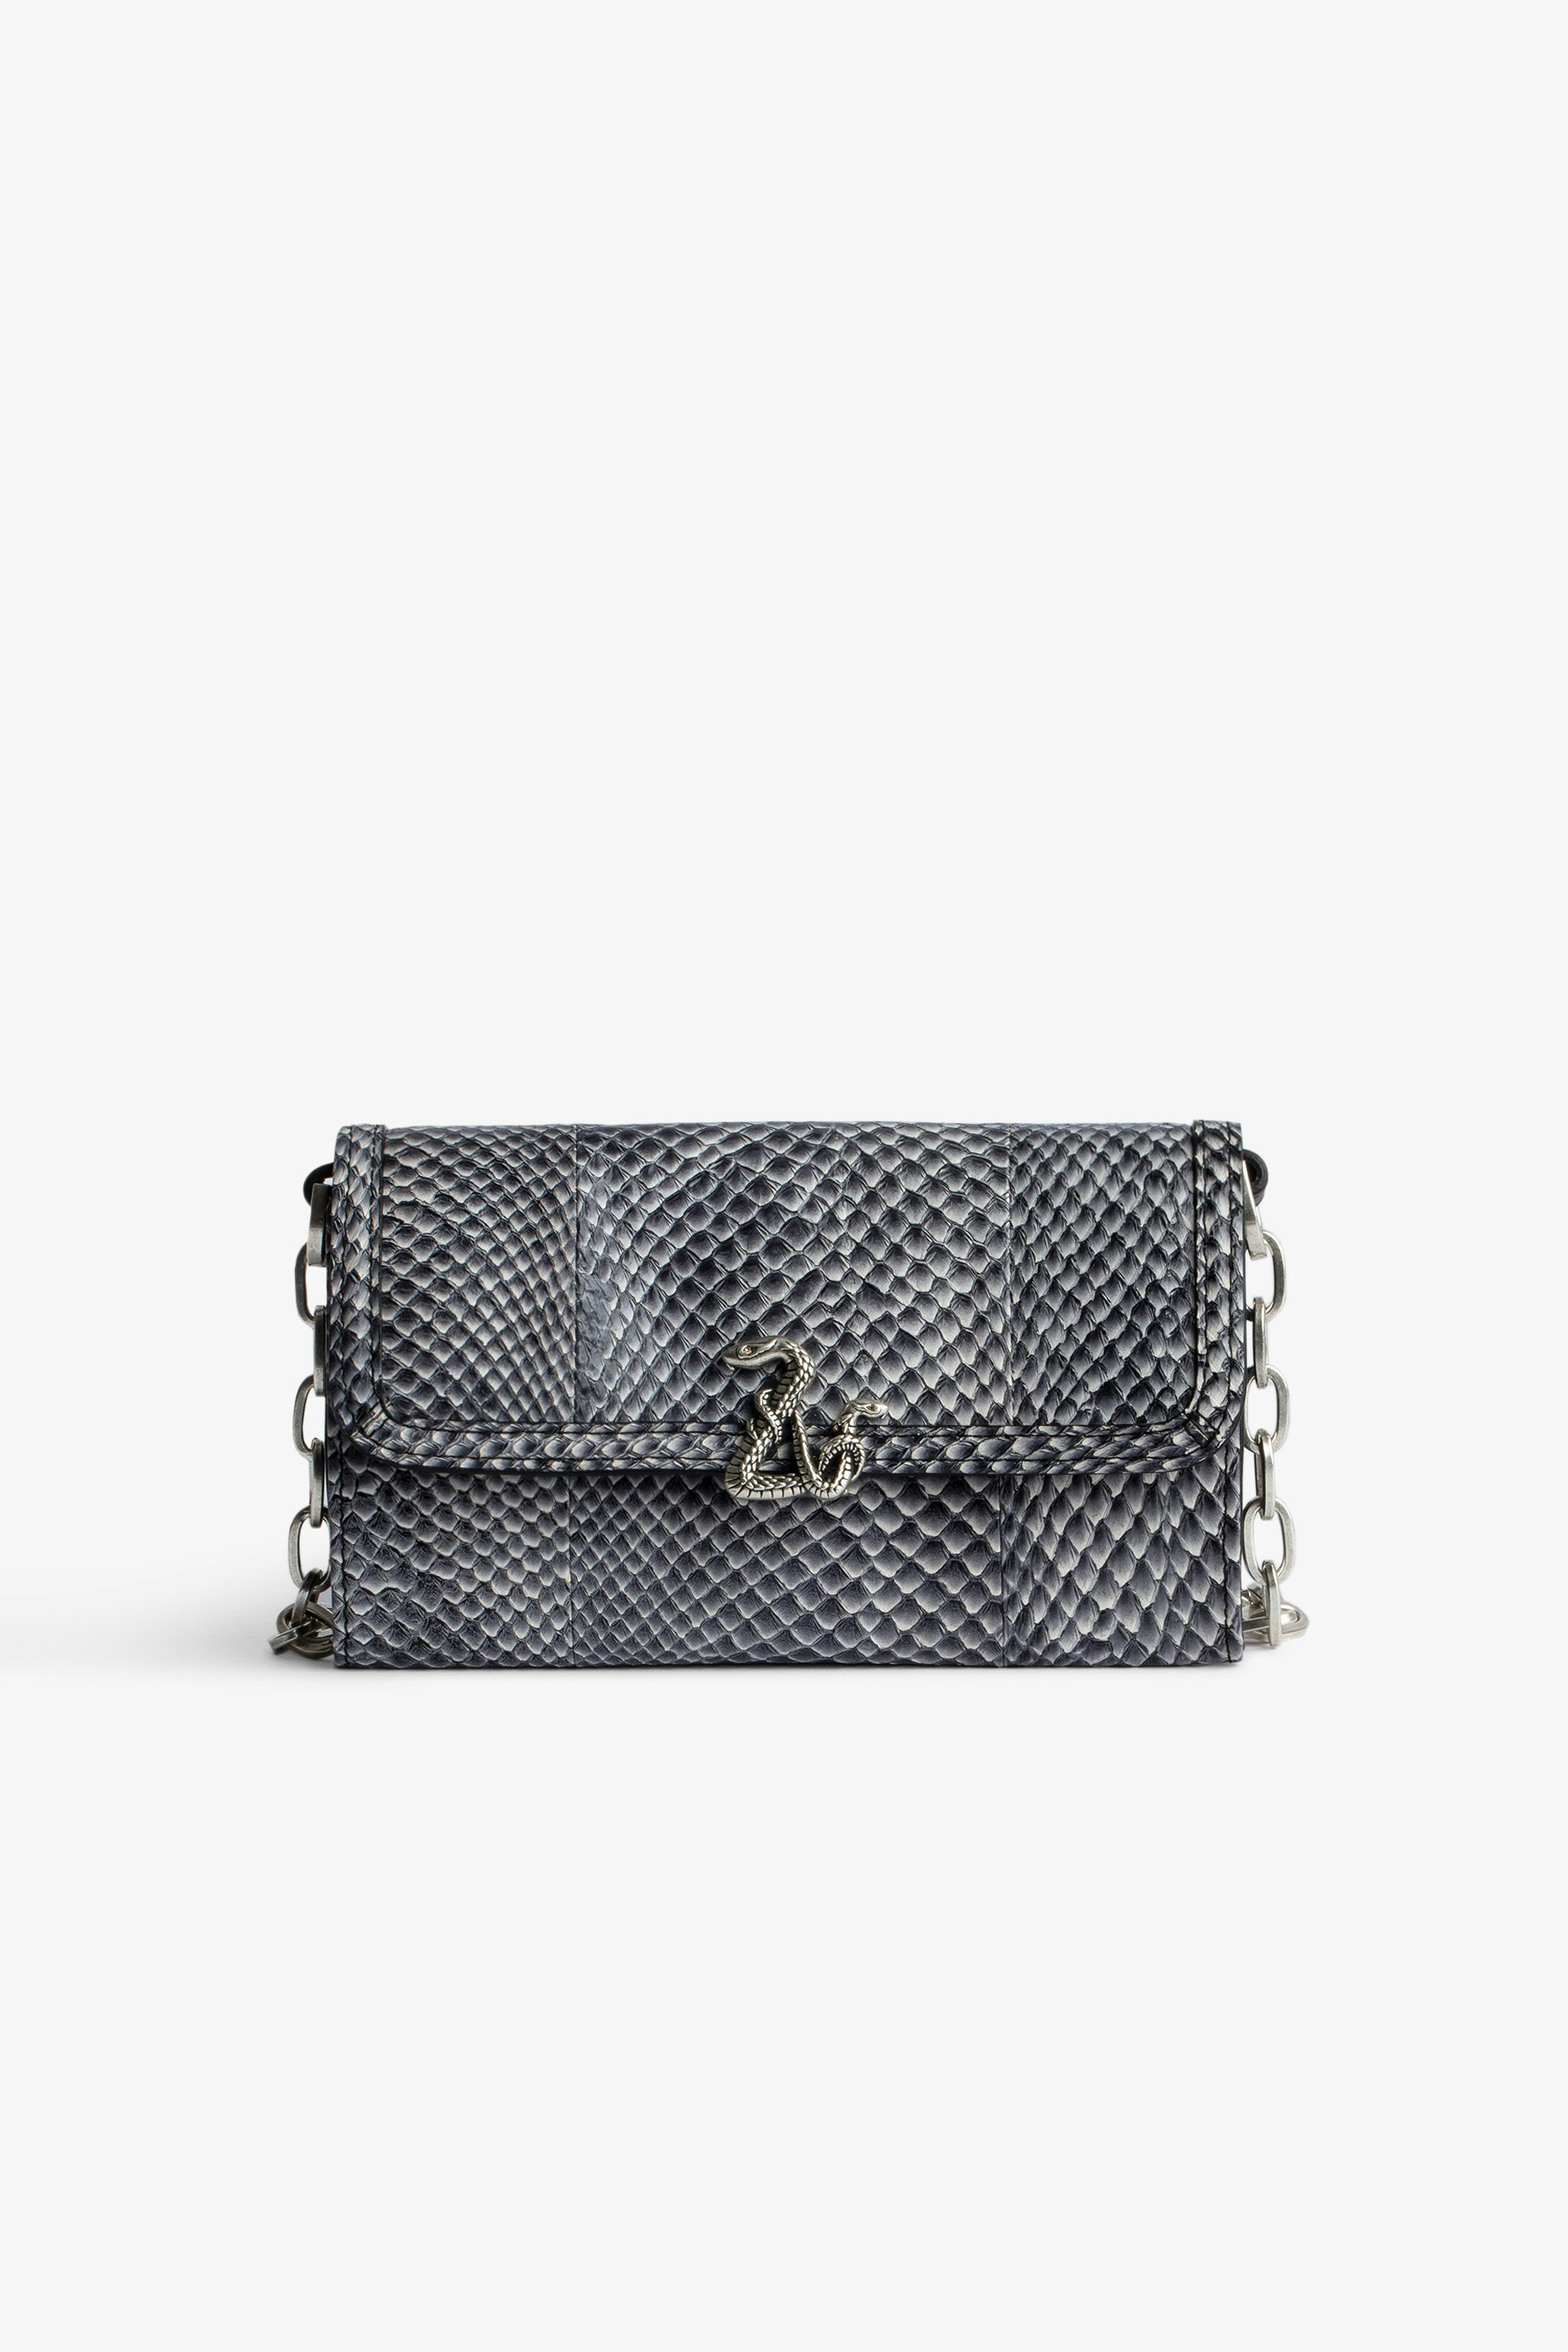 ZV Snake Le Long 財布 Women’s black python-embossed leather wallet with ZV snake